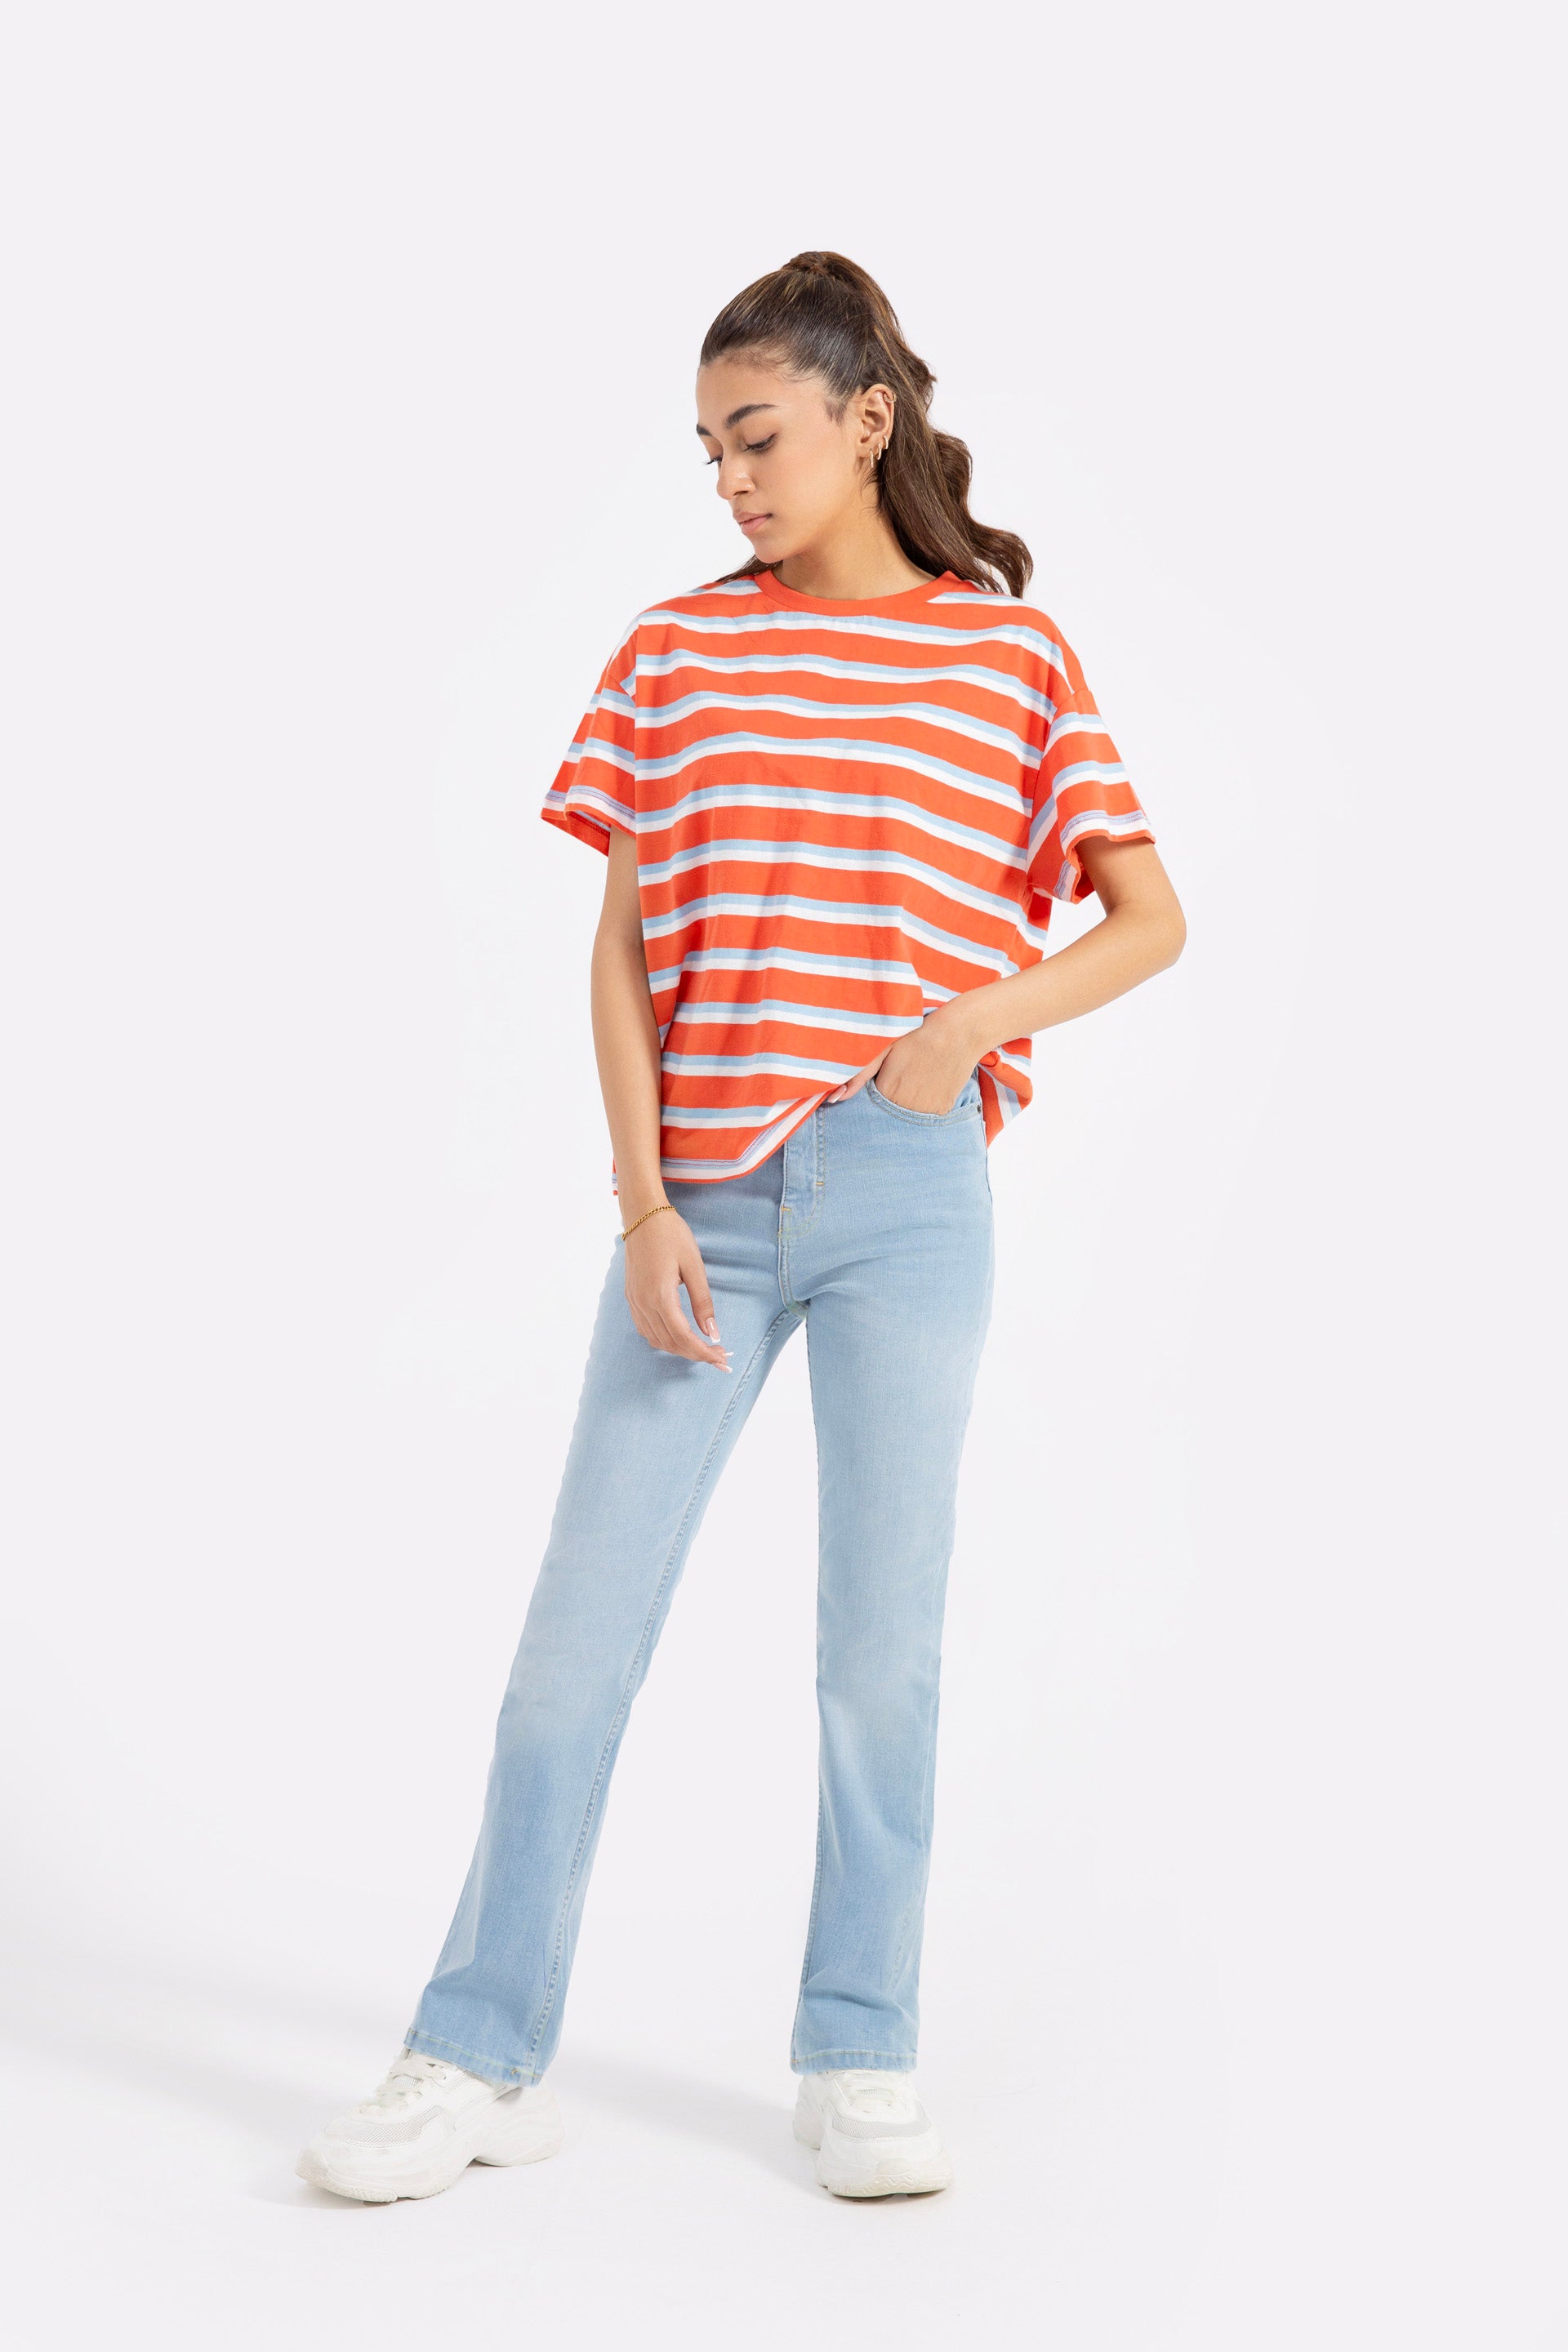 women jeans sale Outfitters